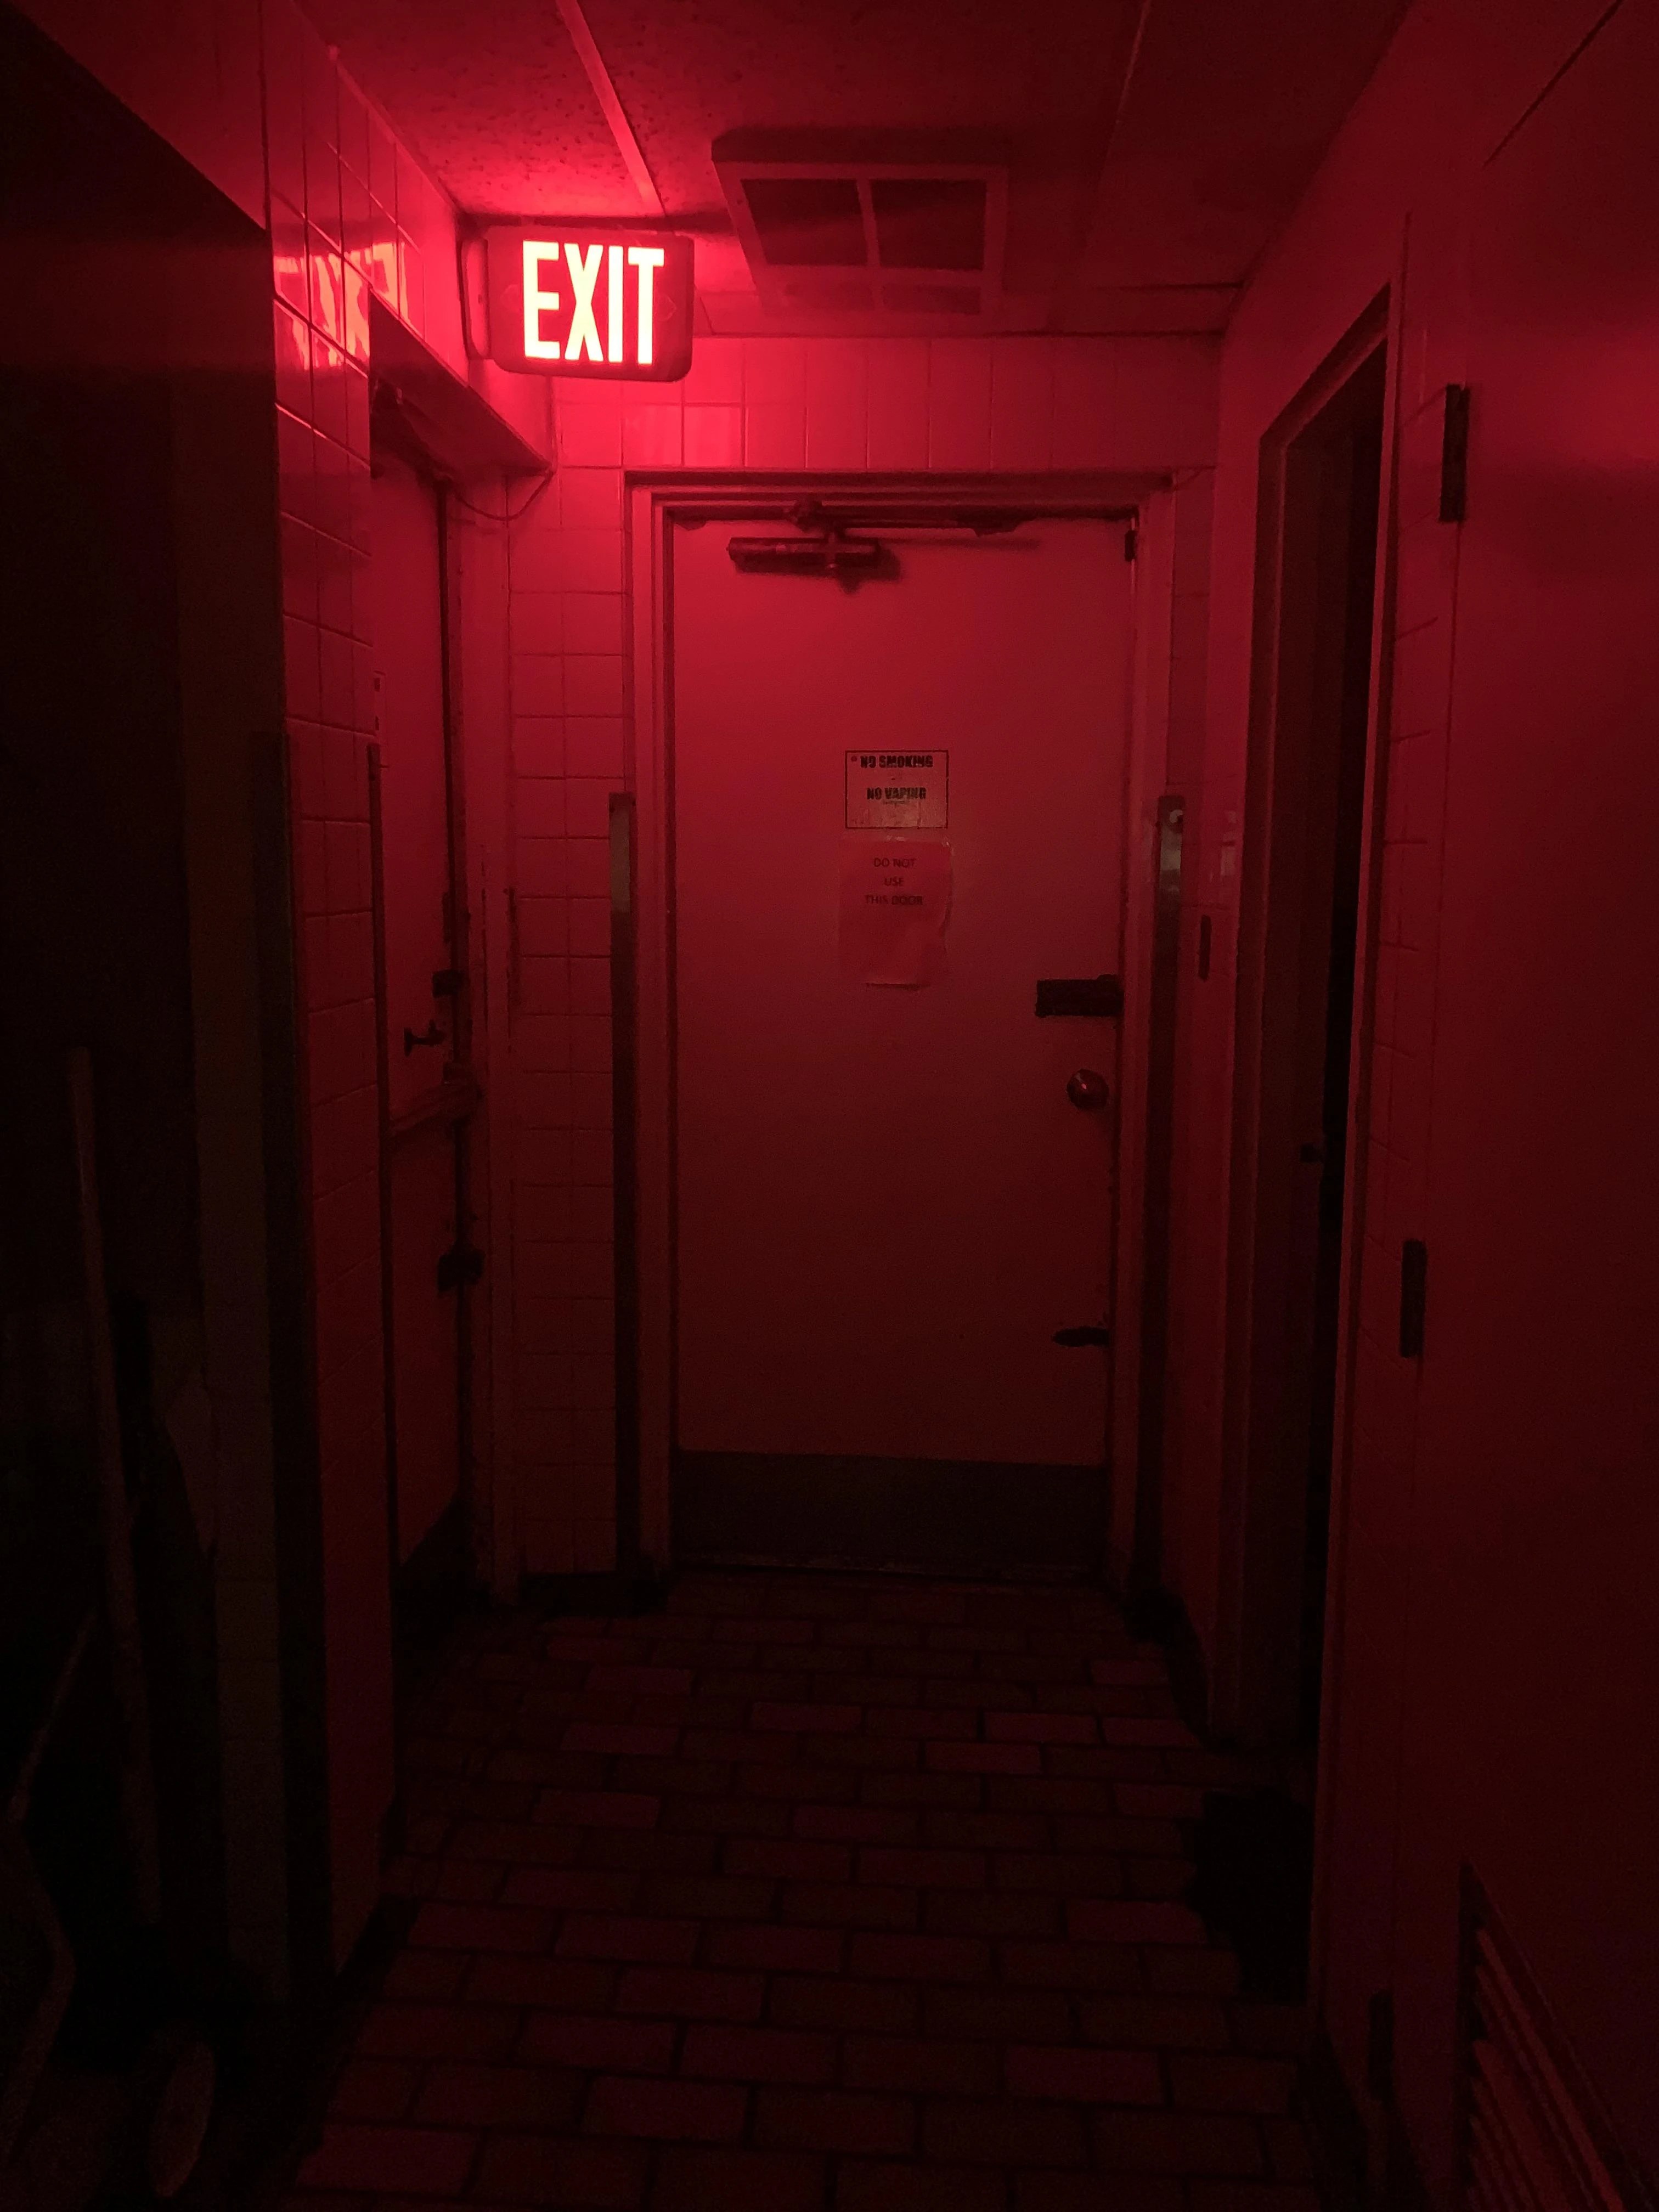 Welcome to the backrooms, you just noclipped into the worst floor of all. :  r/backrooms